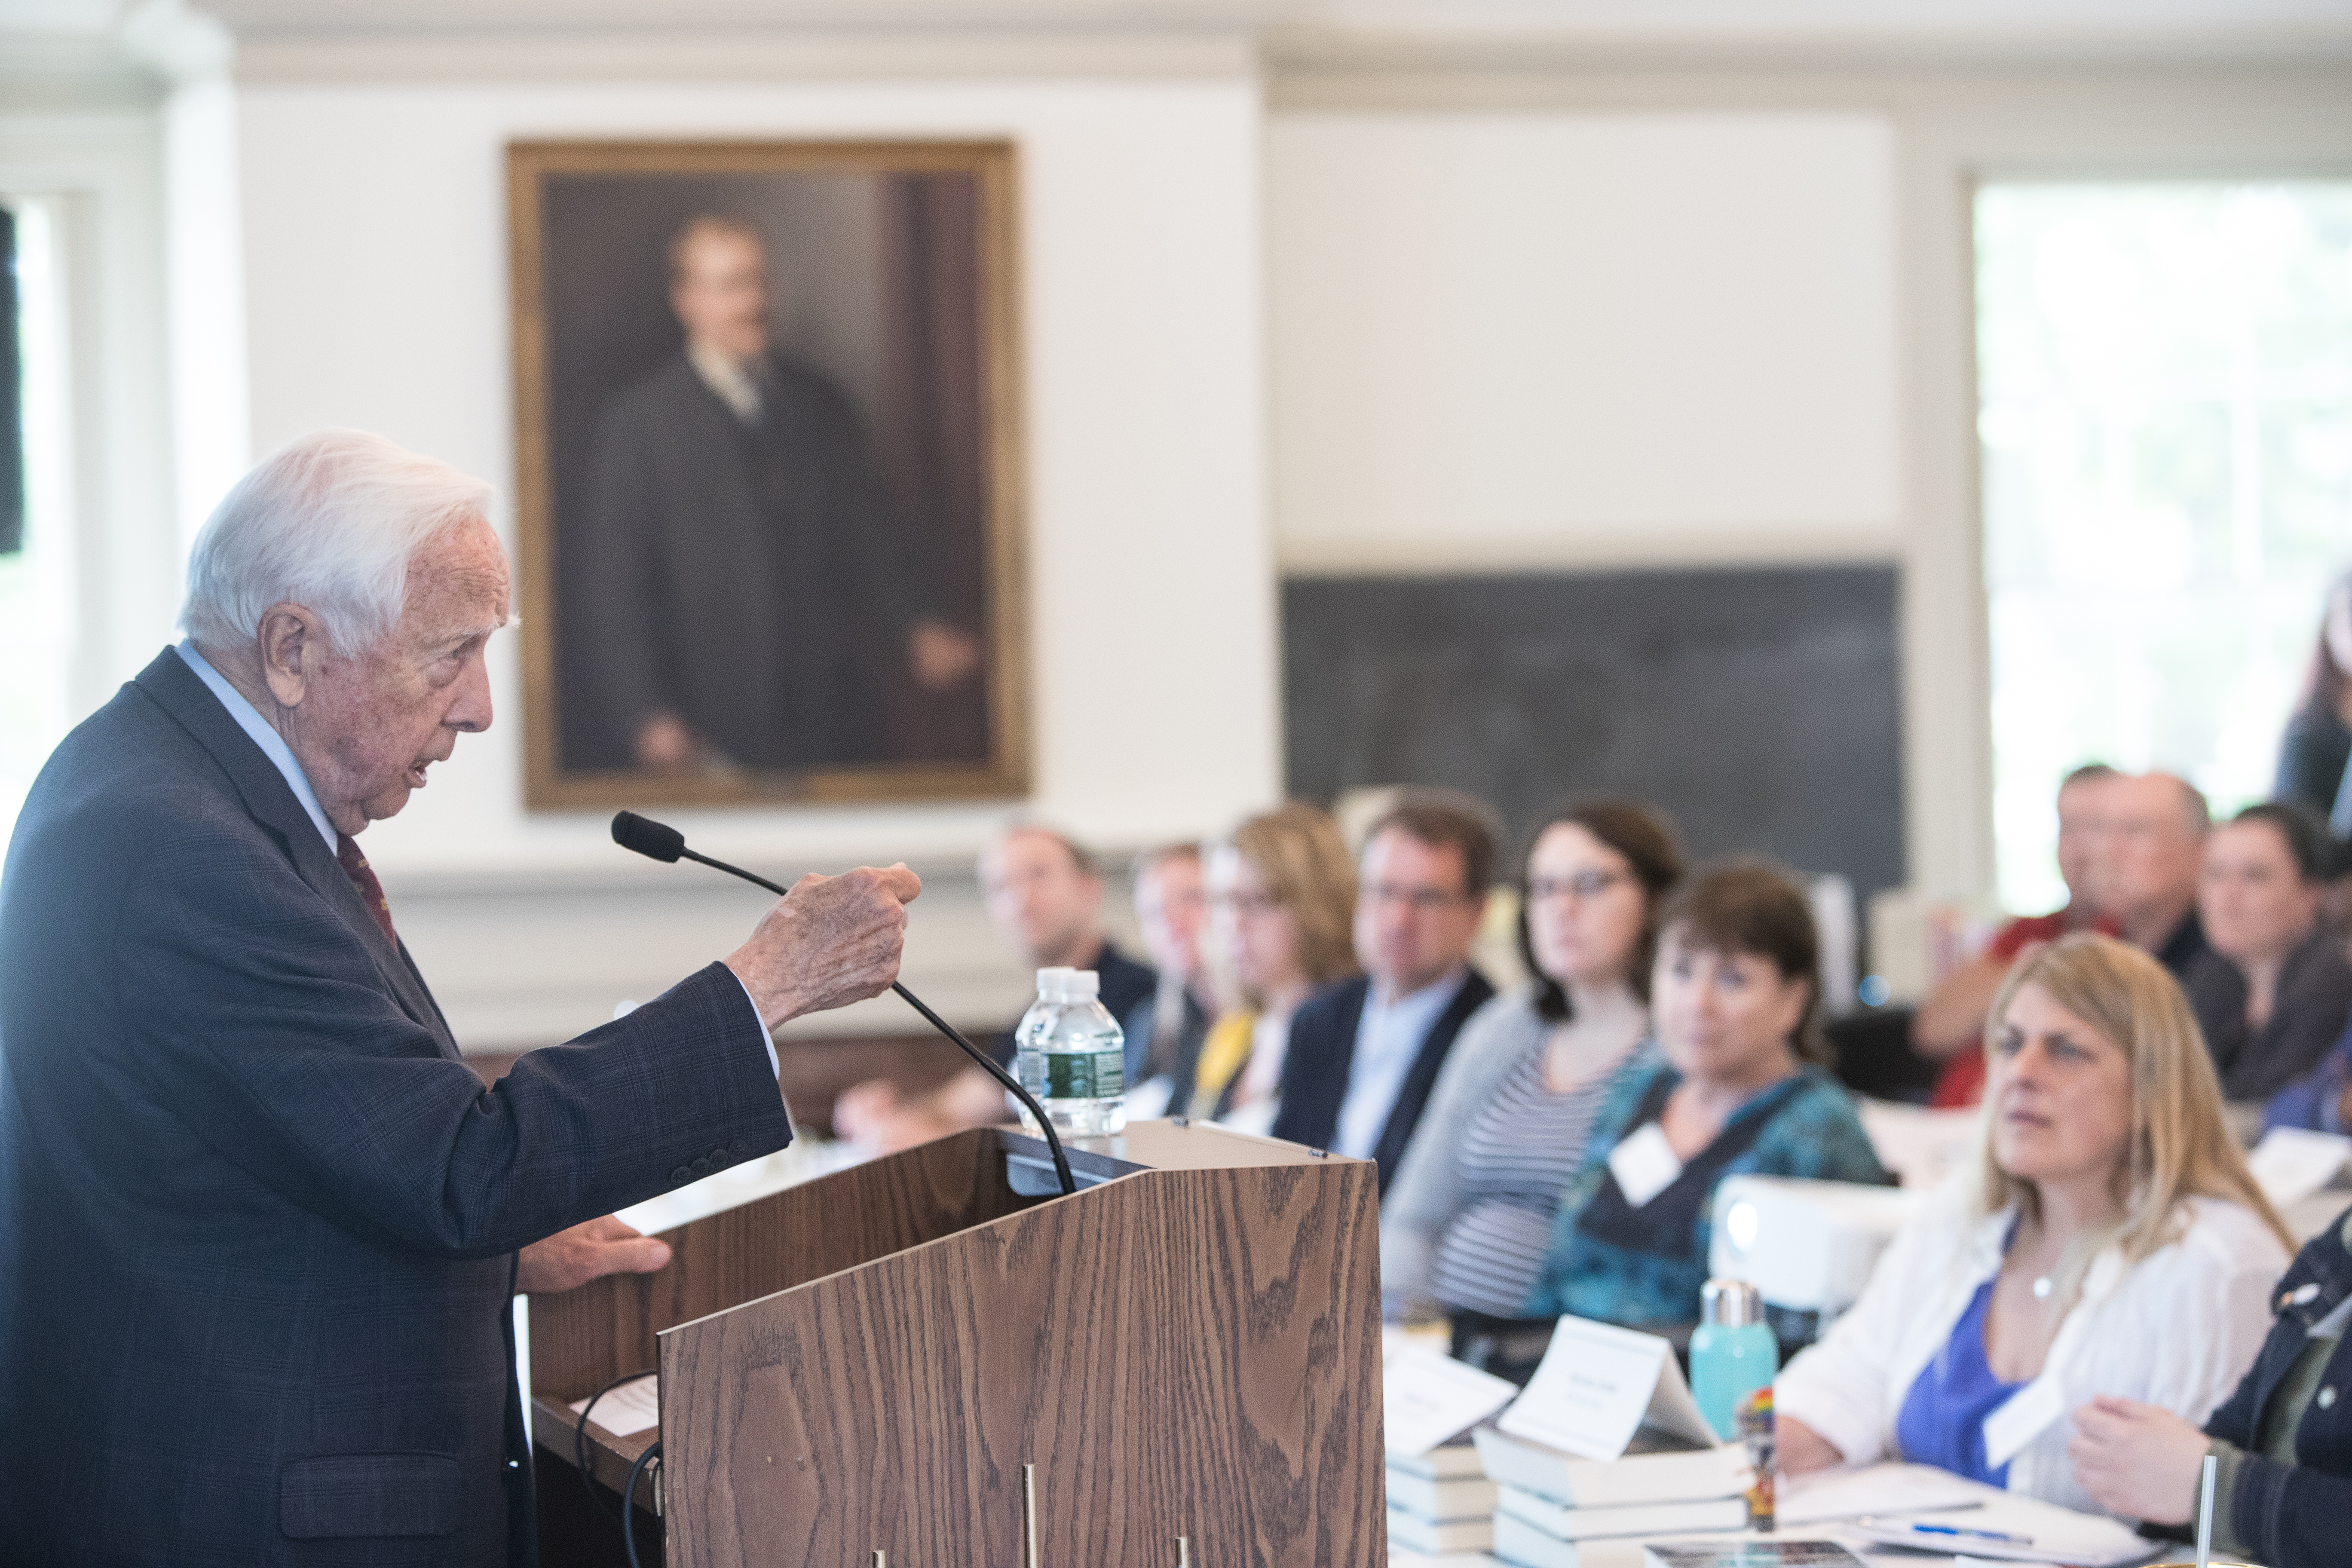 David McCullough leads the pilot 3-day workshop model at Hingham, site of Andrew W. Robertson's 2020 Seminar, "The Early American Republic, 1787–1808."